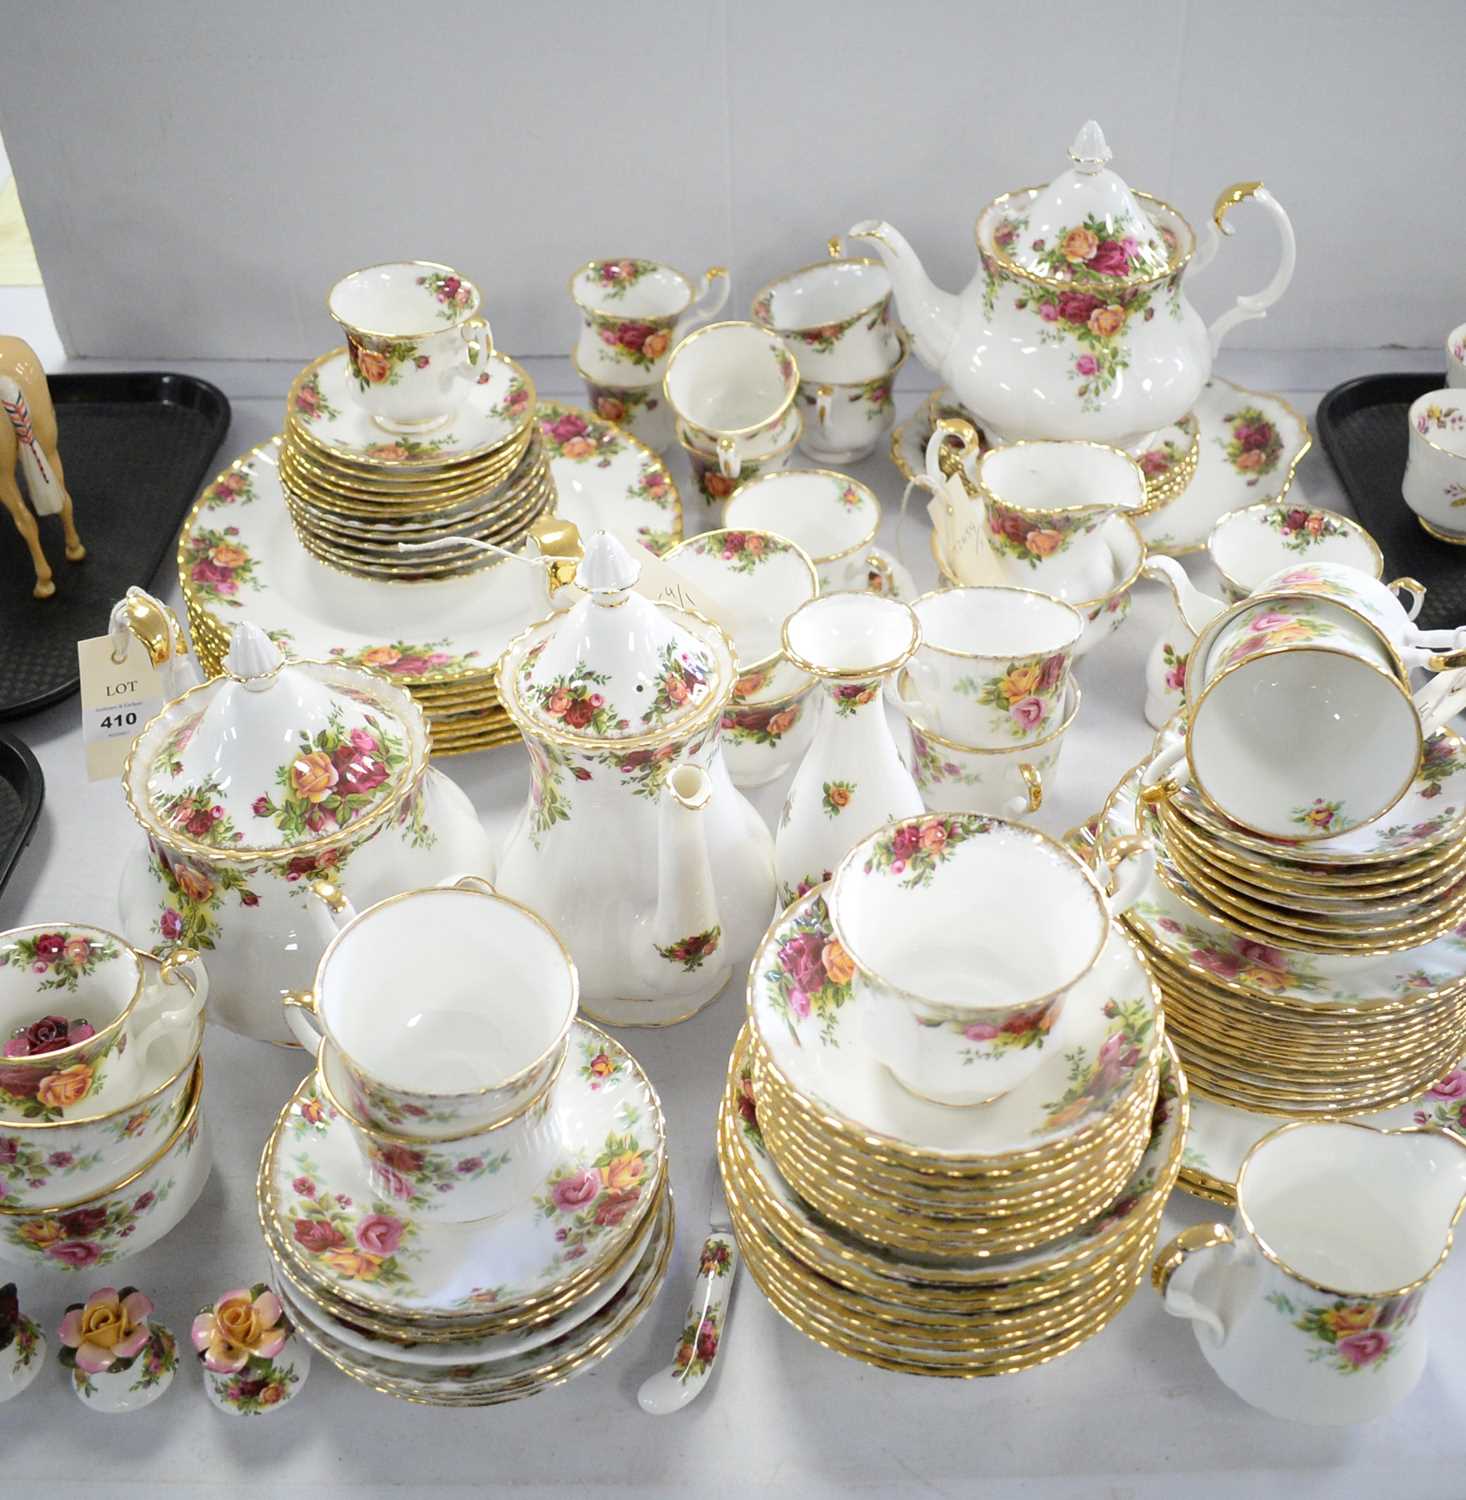 Lot 410 - Large qty. of Royal Albert 'Old Country Roses' tea and dinner ware.